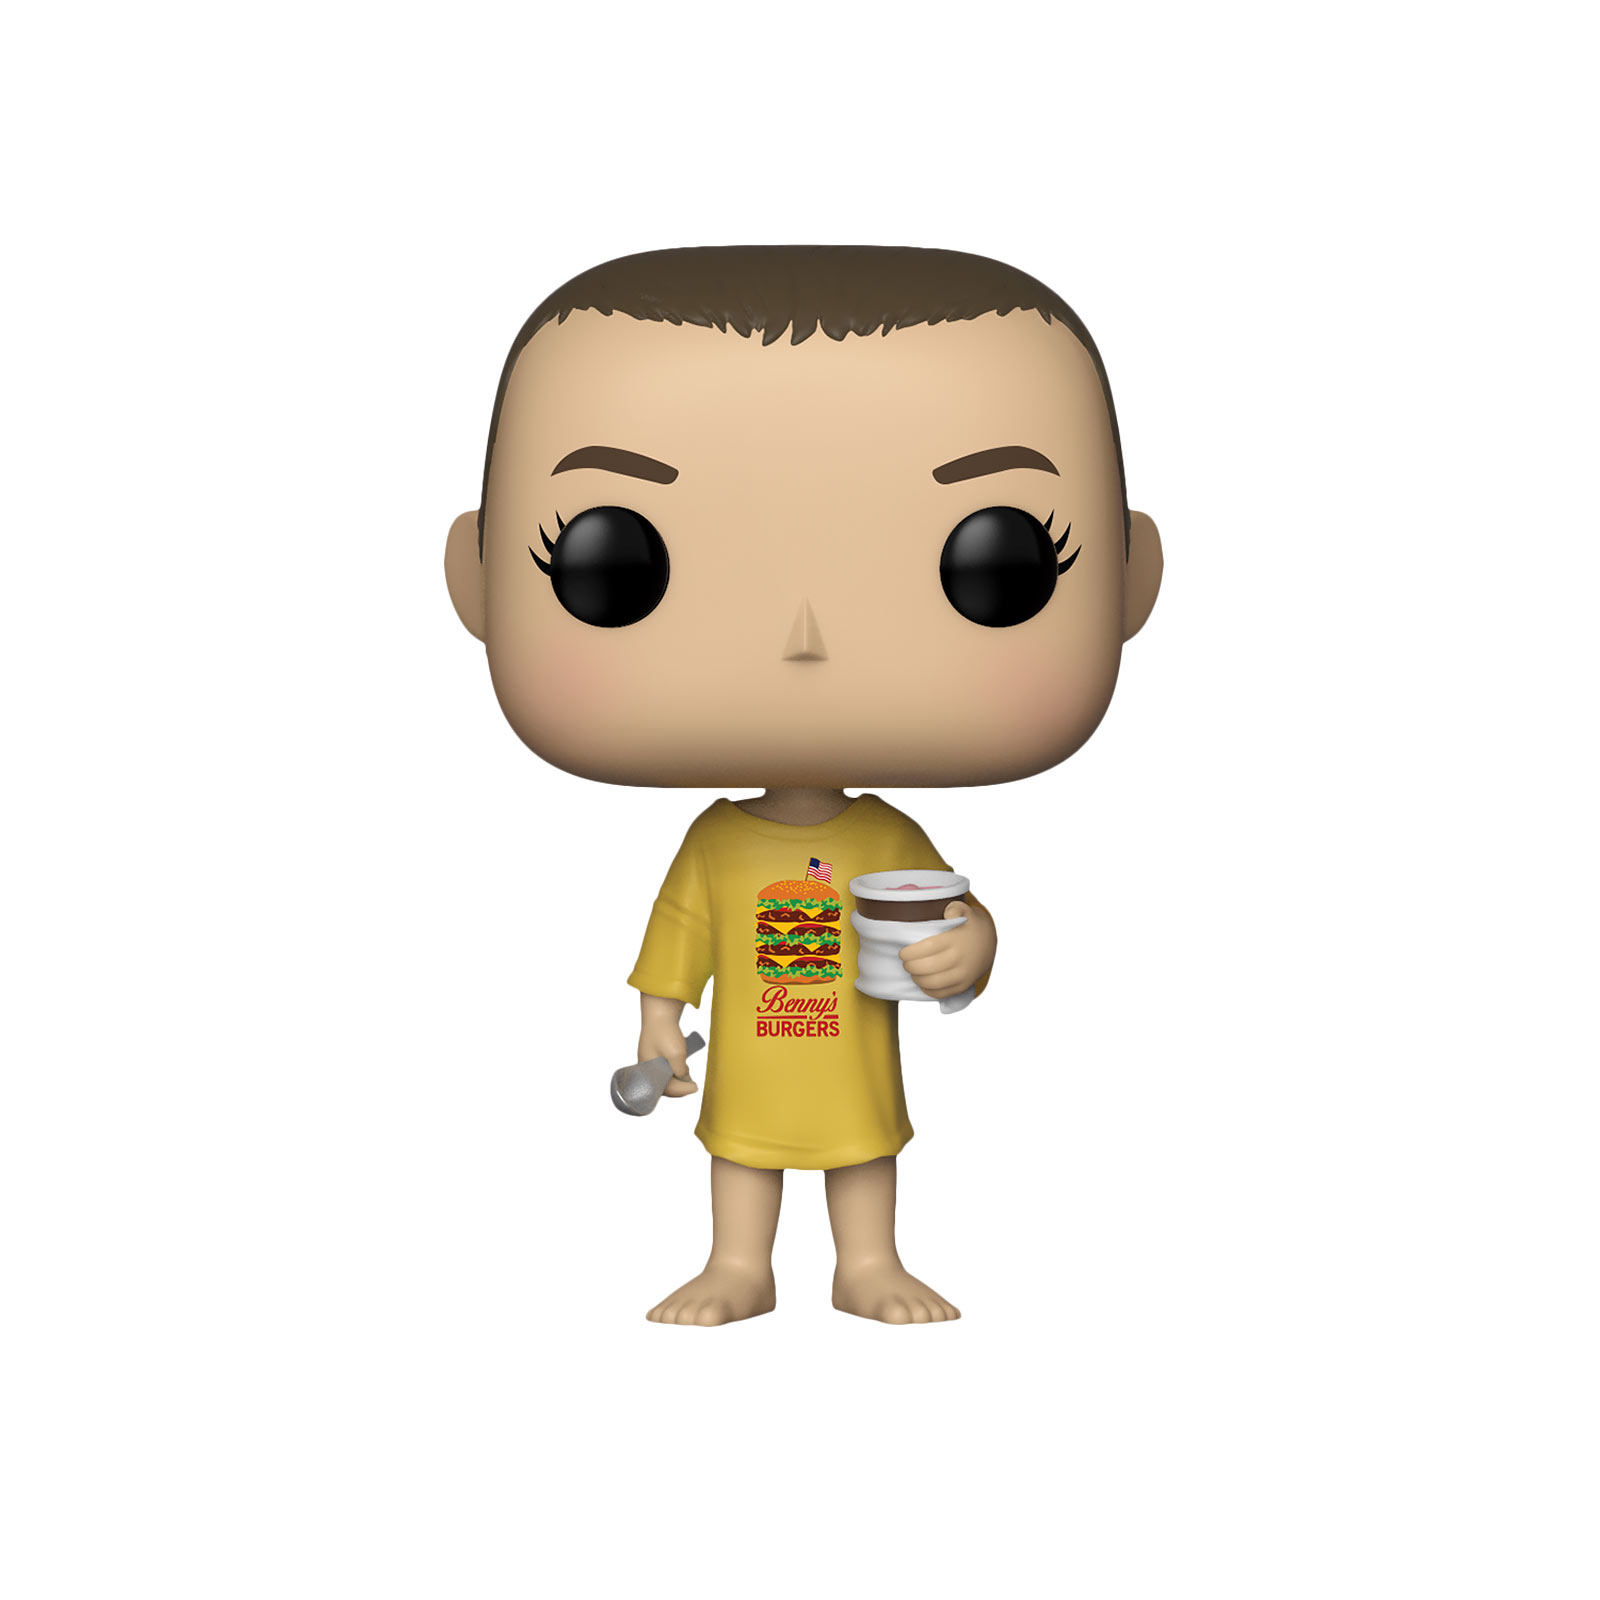 Stranger Things - Eleven with burger T-shirt Funko Pop figure